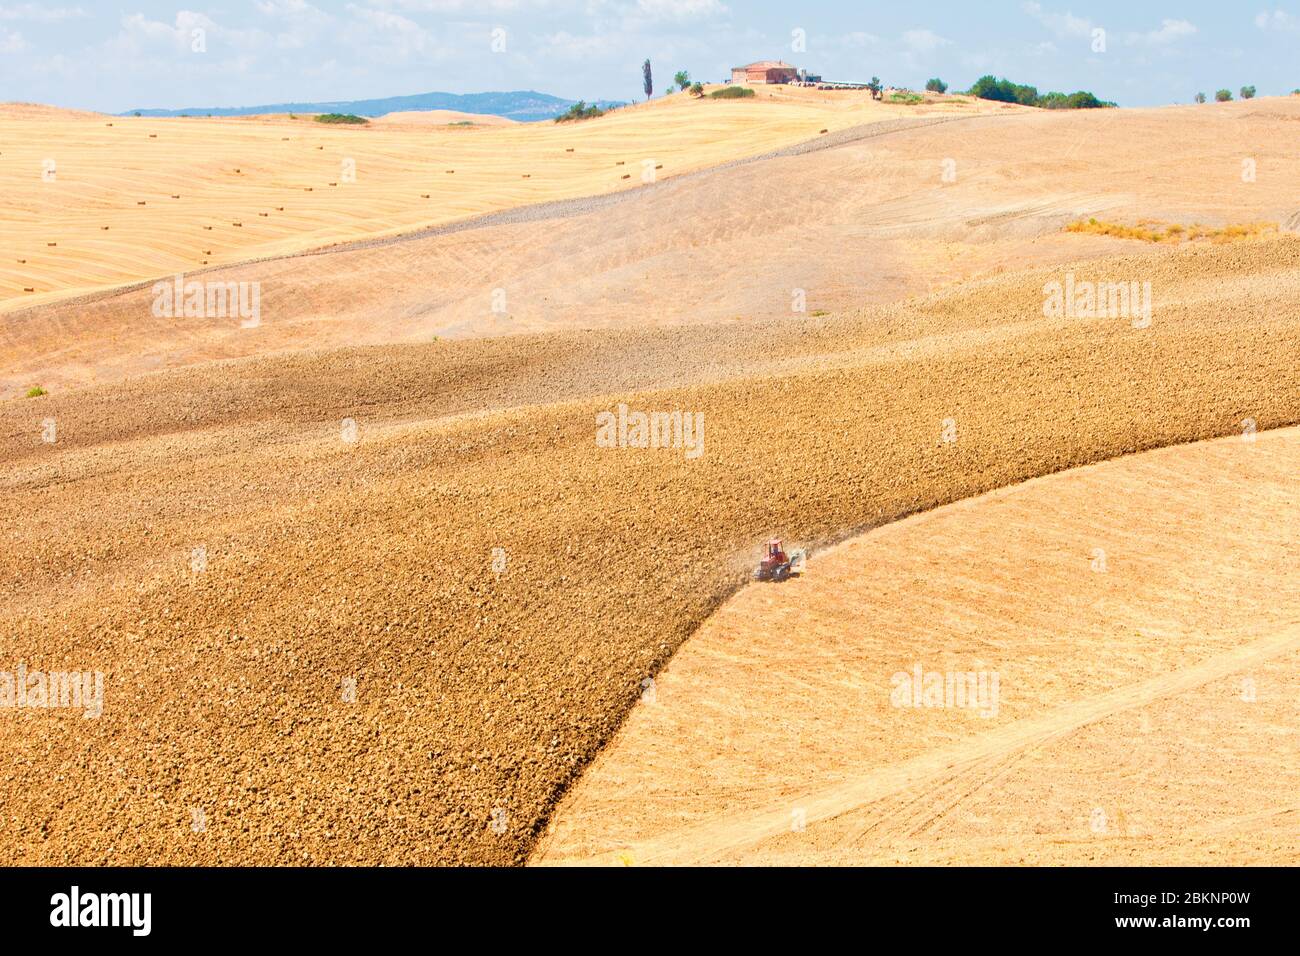 Italy Tuscany Le Crete - Agriculture - Tractor Plowing Field Stock Photo